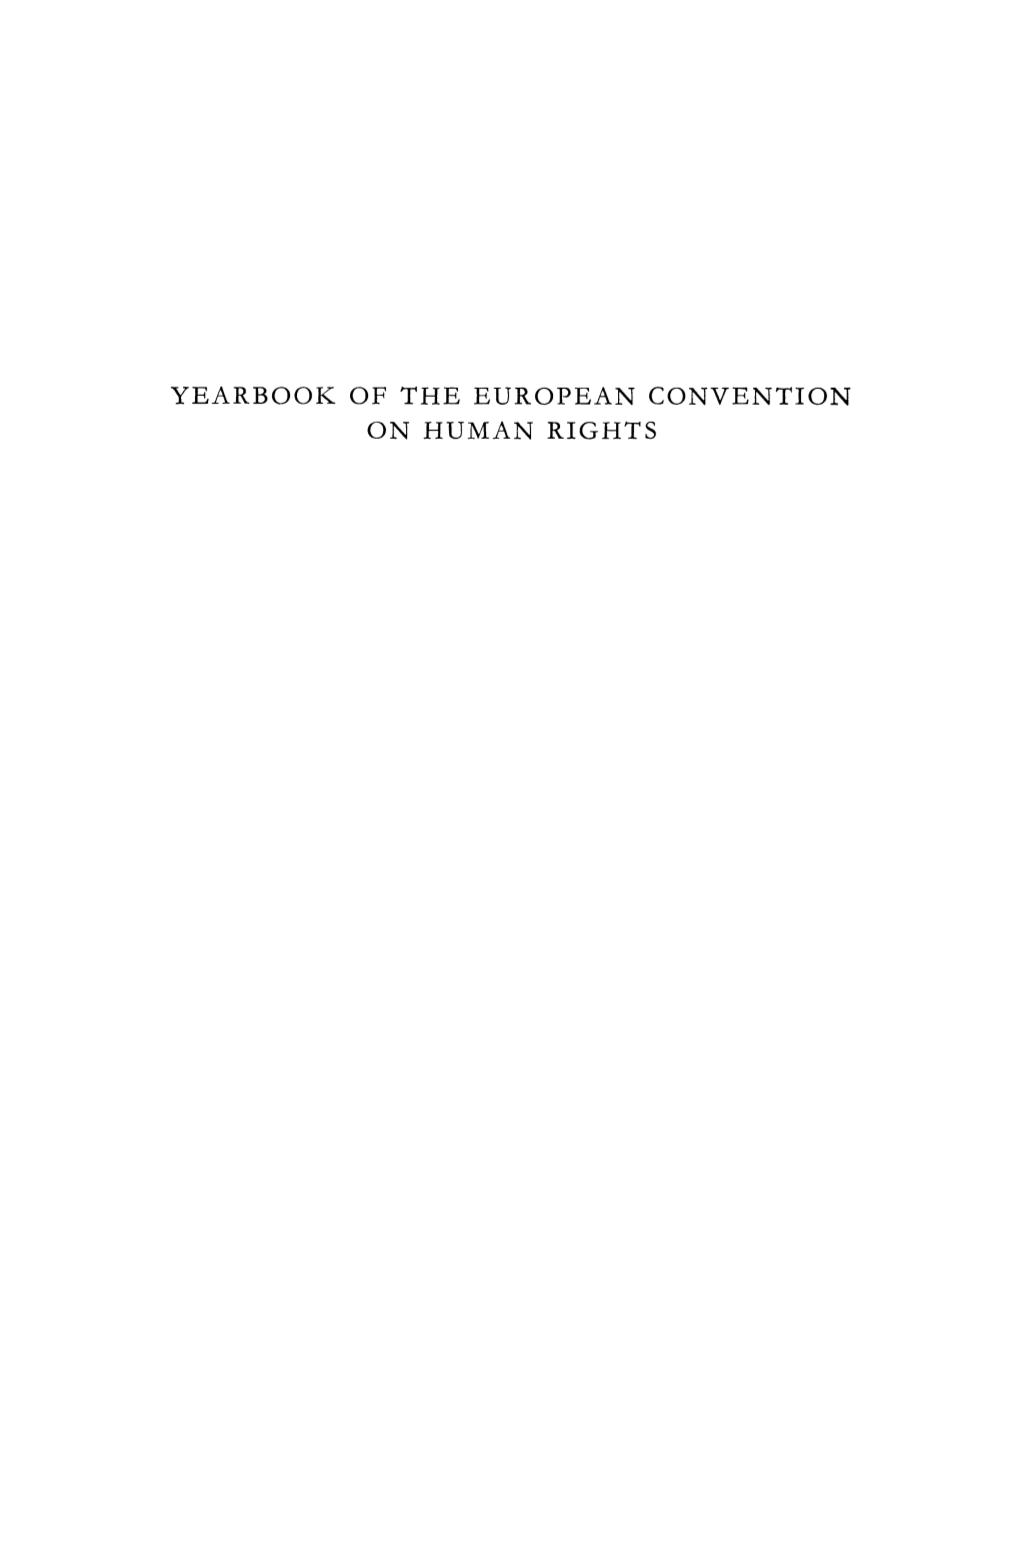 Yearbook of the European Convention on Human Rights Yearbook of the European Convention on Human Rights the European Commission and European Court of Human Rights